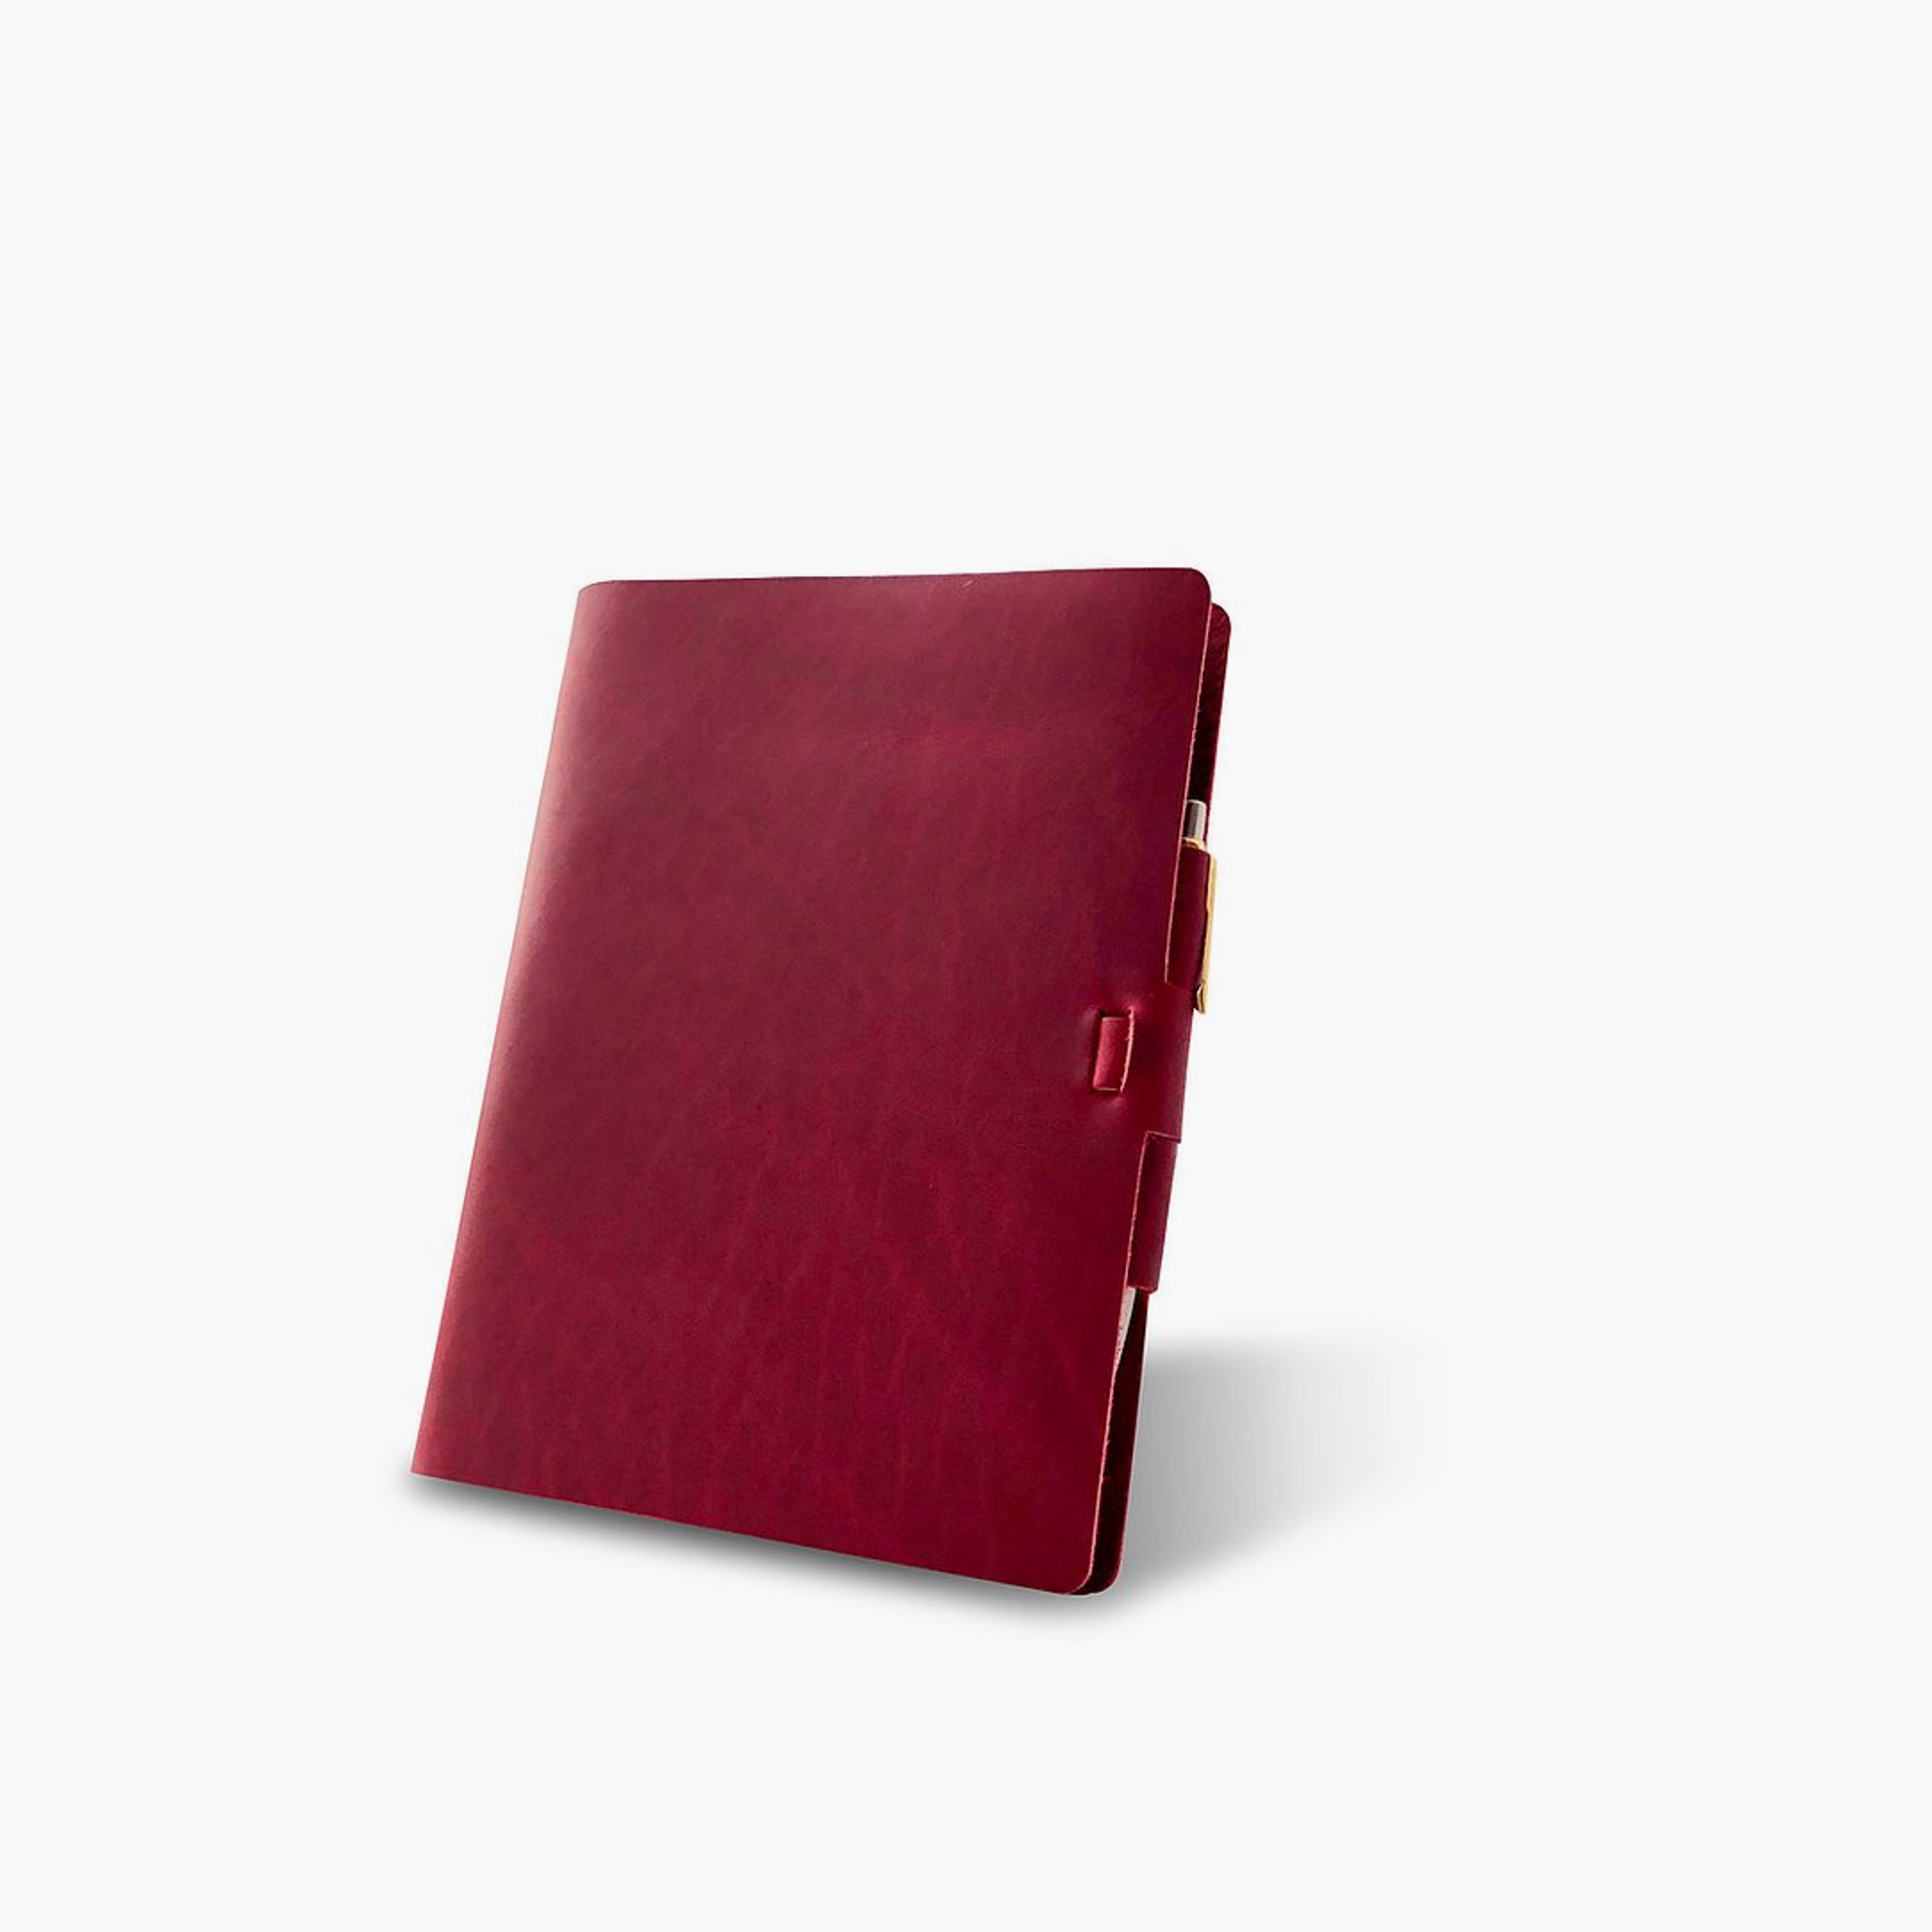 Metric Cut - Refillable Leather Journal